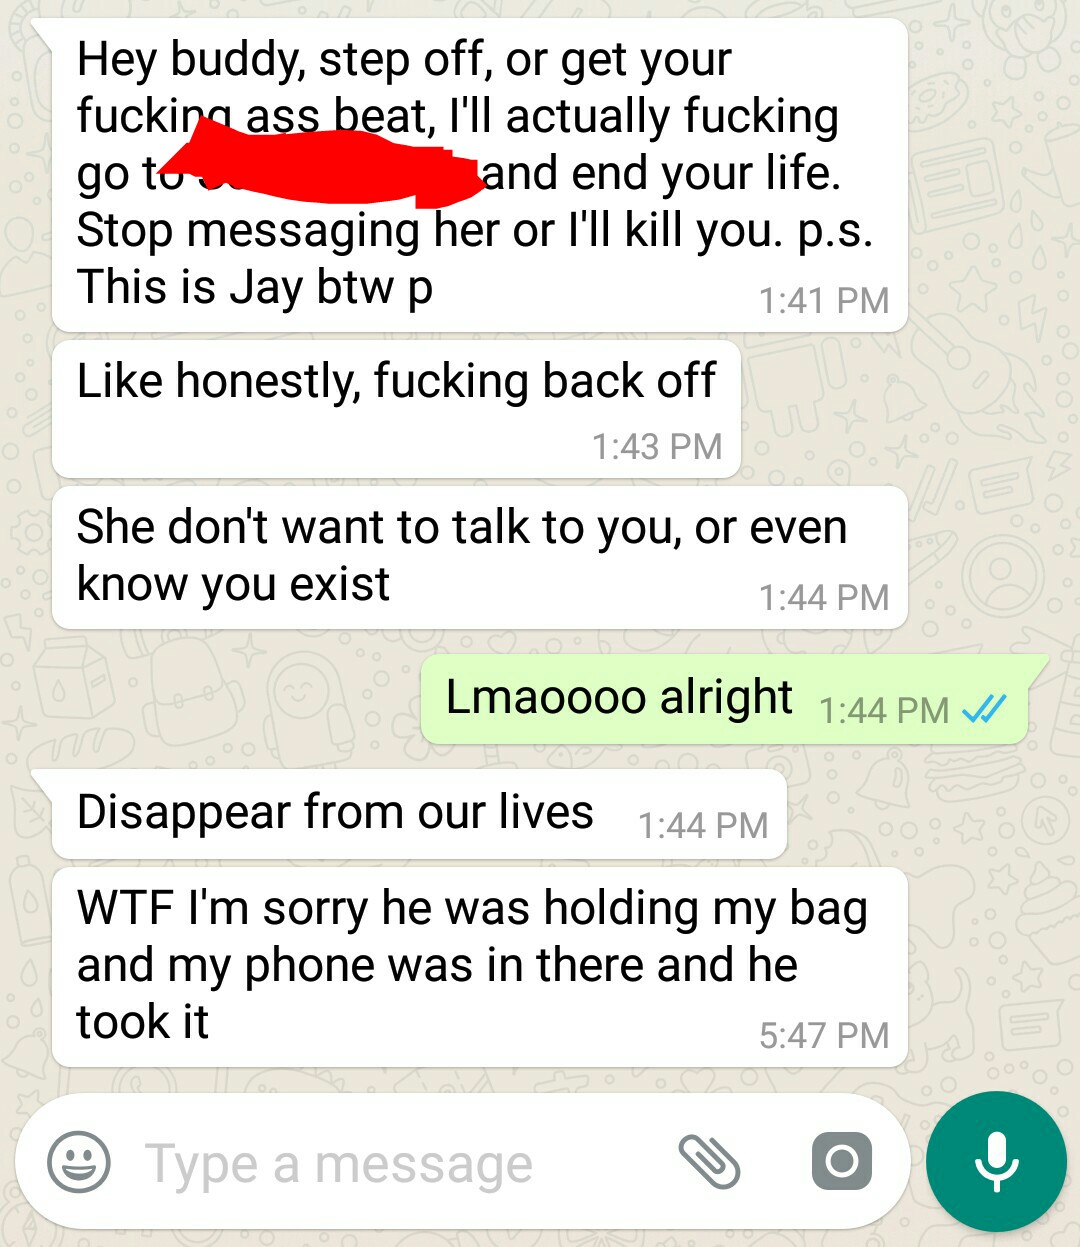 Funny whatsapp exchange of dude telling other dude to stay away from his girl